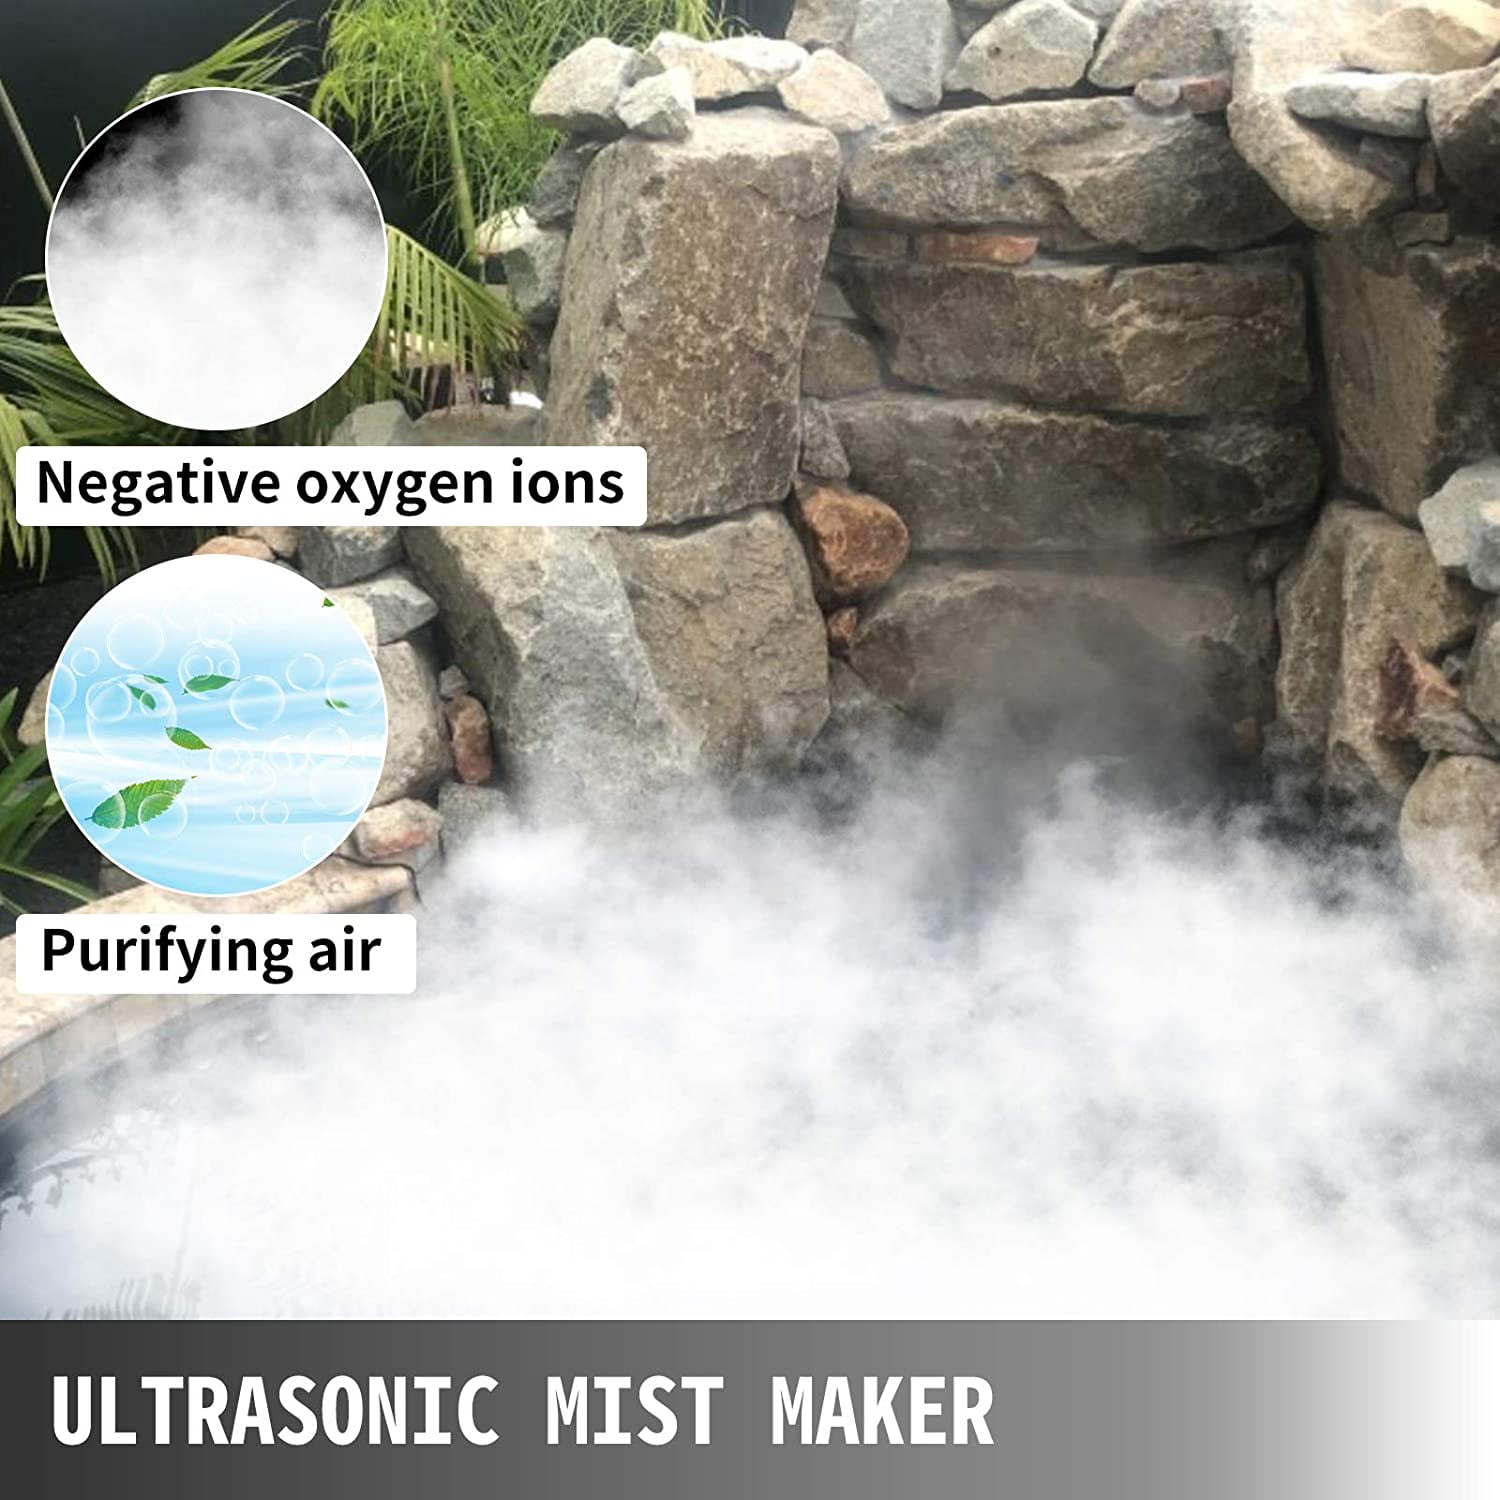 TOPQSC Mist Maker Fogger Humidifier for Gardening and Pond Use,12 Head Stainless Steel Ultrasonic Mist Humidifier